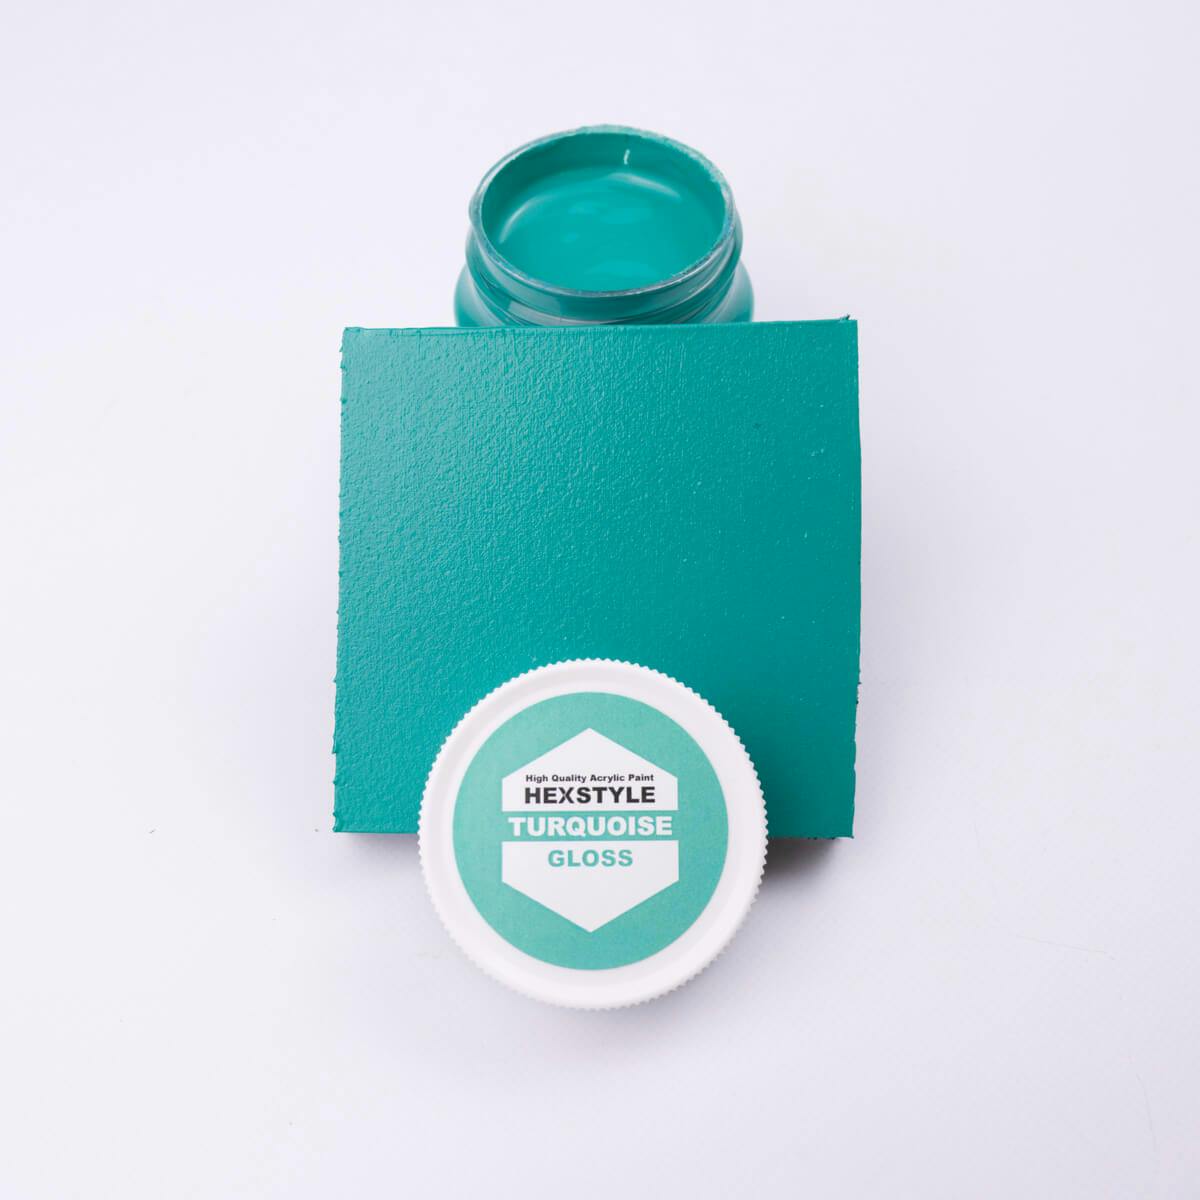 Hexstyle gloss turquoise colour swatch